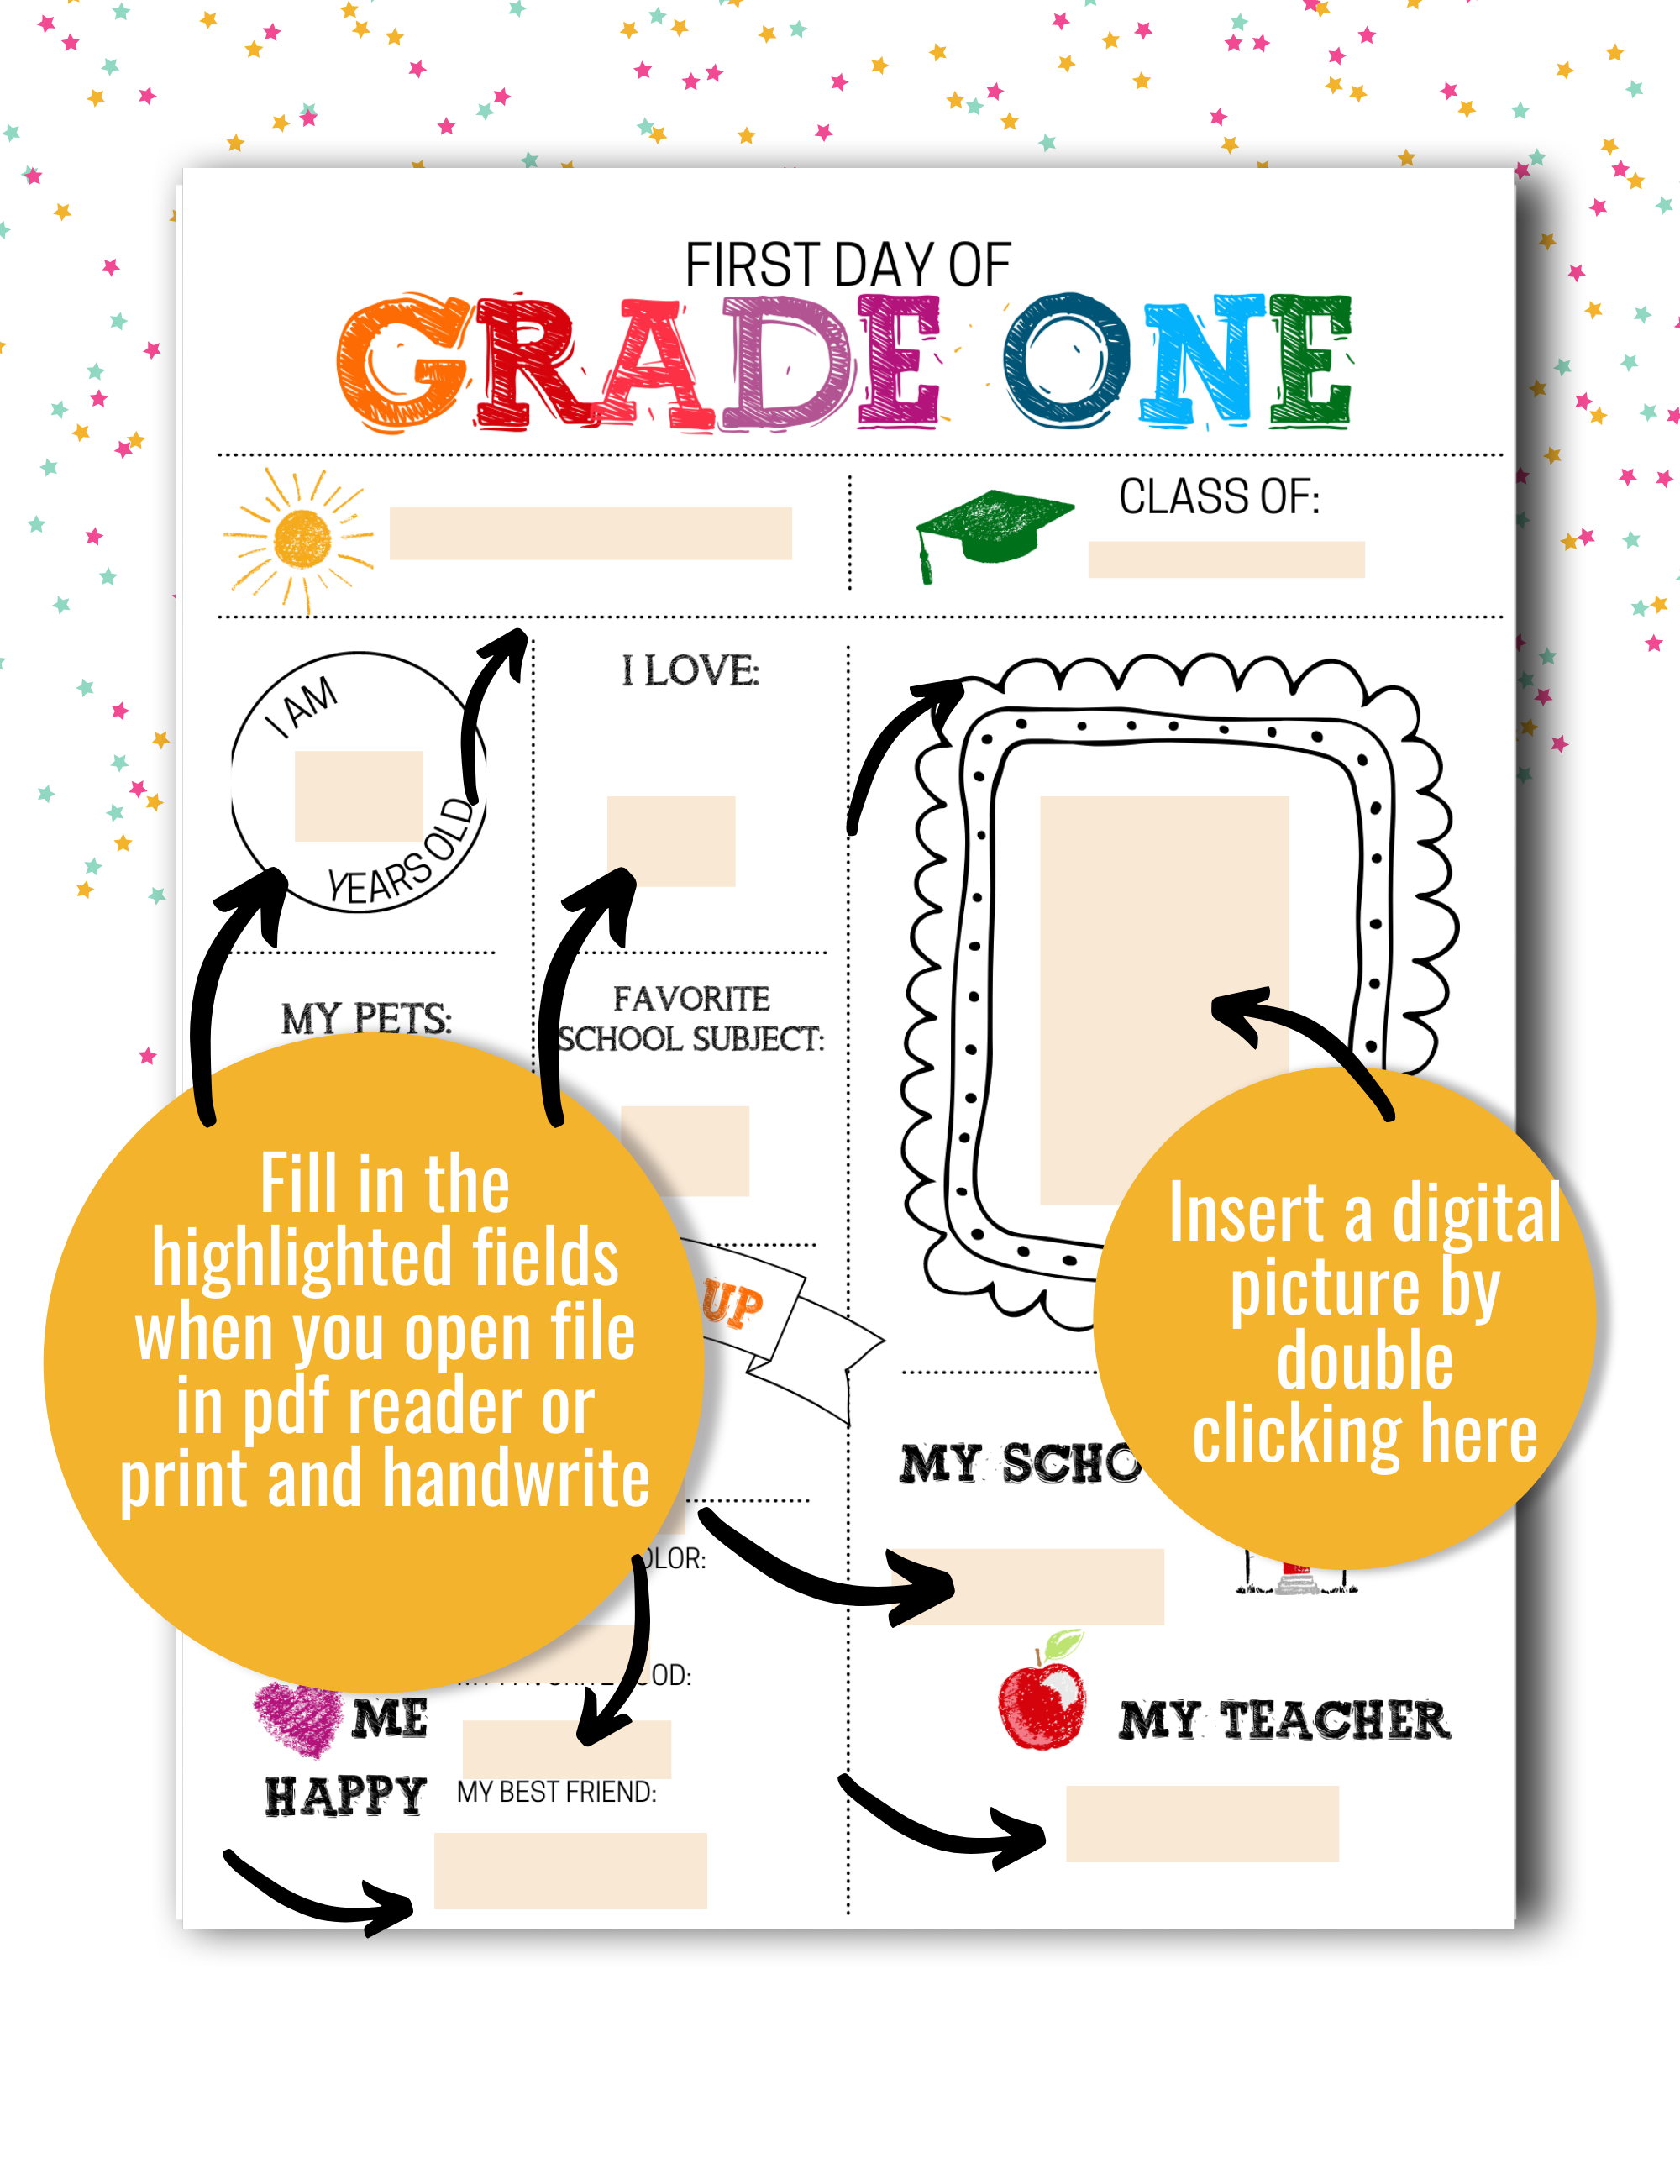 First Day of School Sign (Classic Clean Version) - Kindergarten to Grade Six